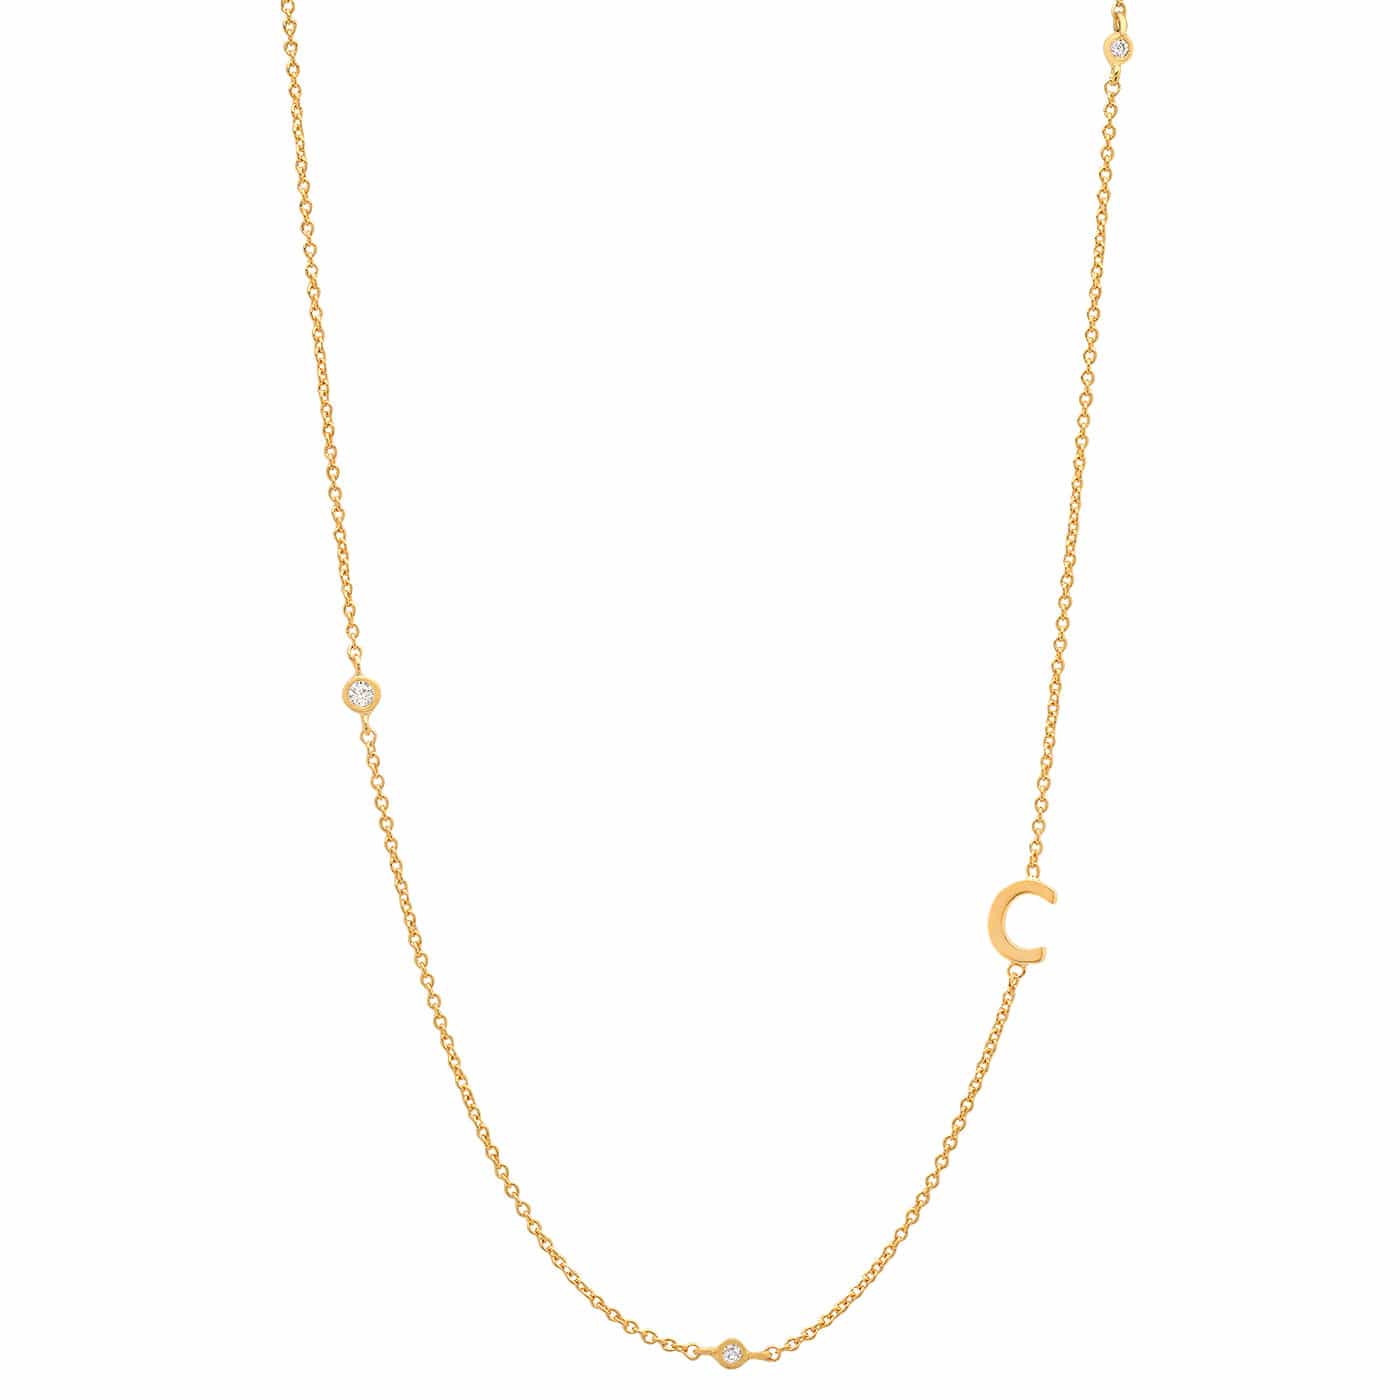 TAI JEWELRY Necklace C Sideways Initial Gold Necklace With CZ Accents